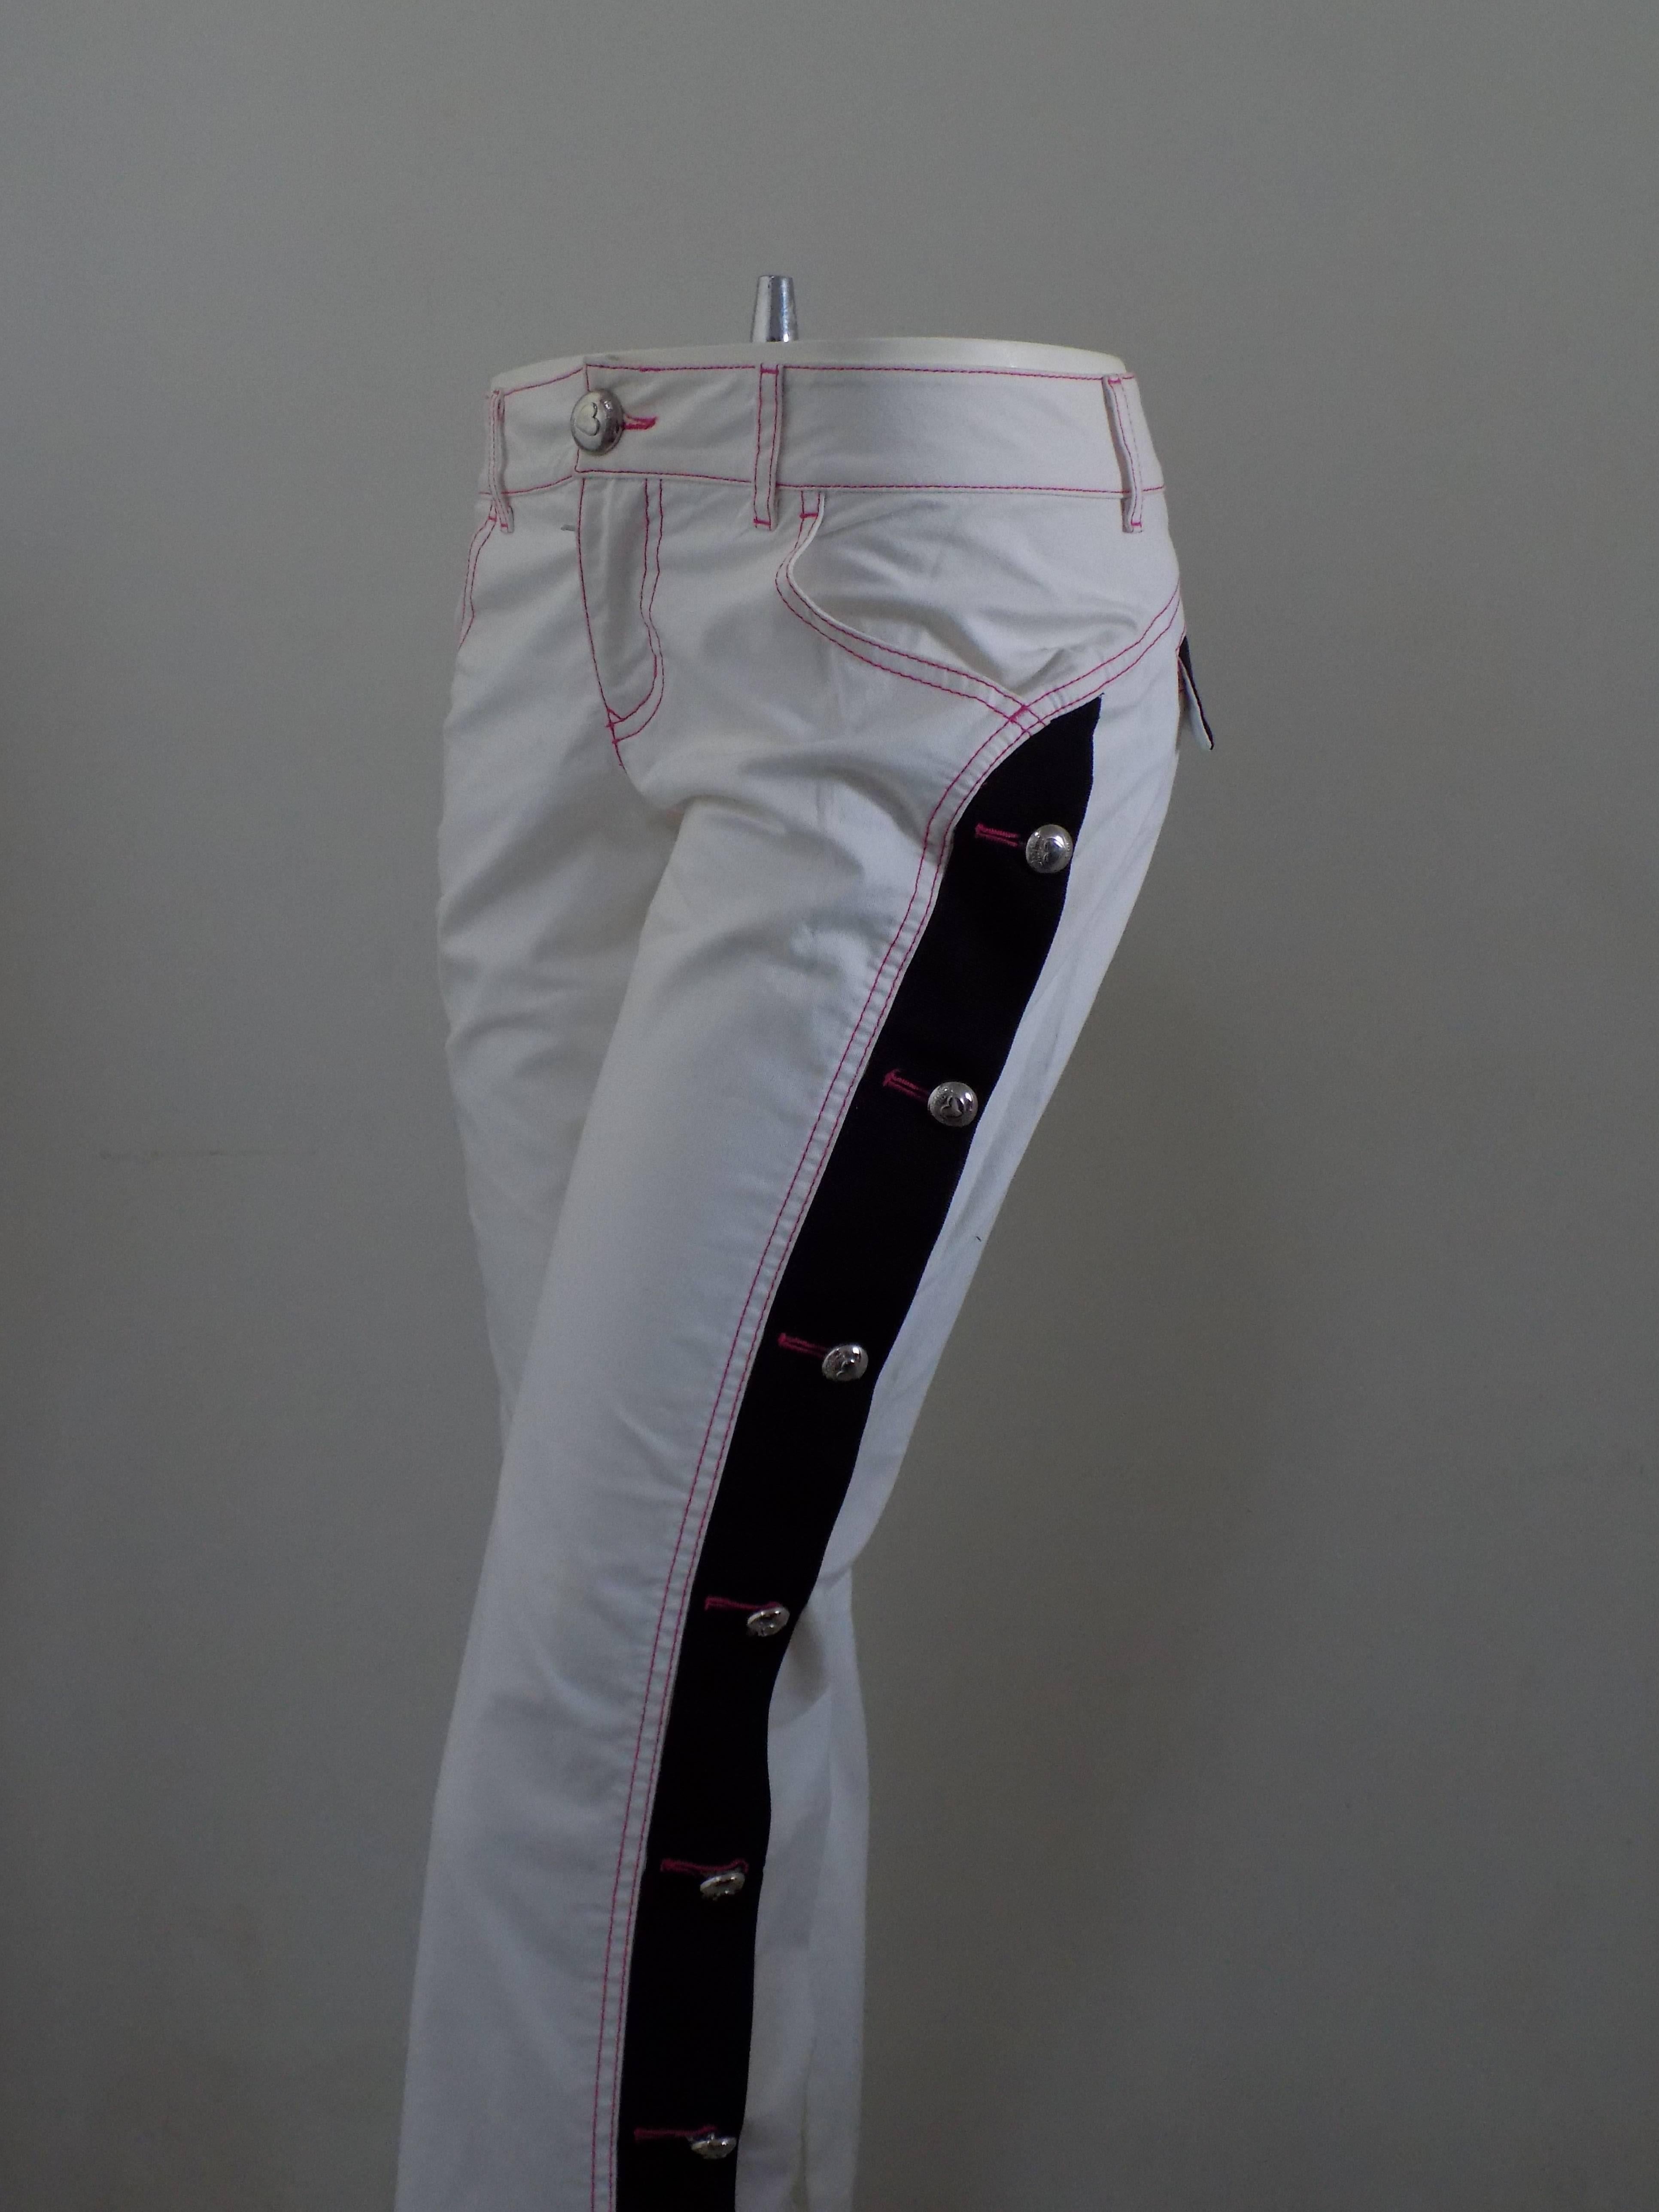 Moschino Jeans white trousers

Silver tone hardware with small hearts on them
